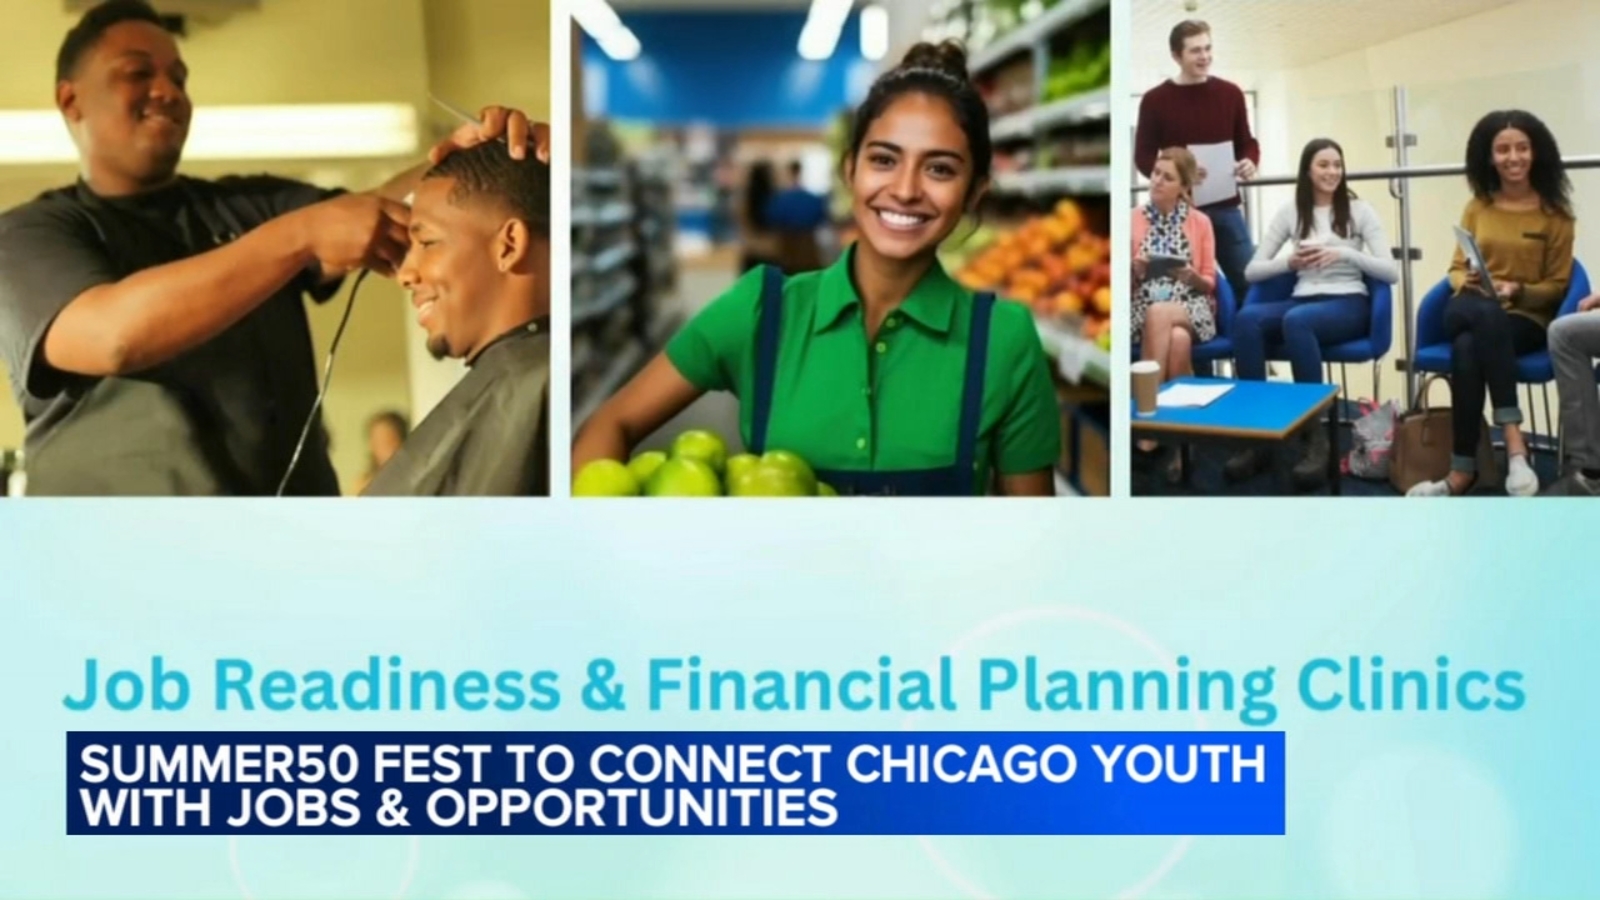 Summer-50 Fest to connect Chicago youth with jobs, opportunities for success in Wards 365 event at United Center [Video]